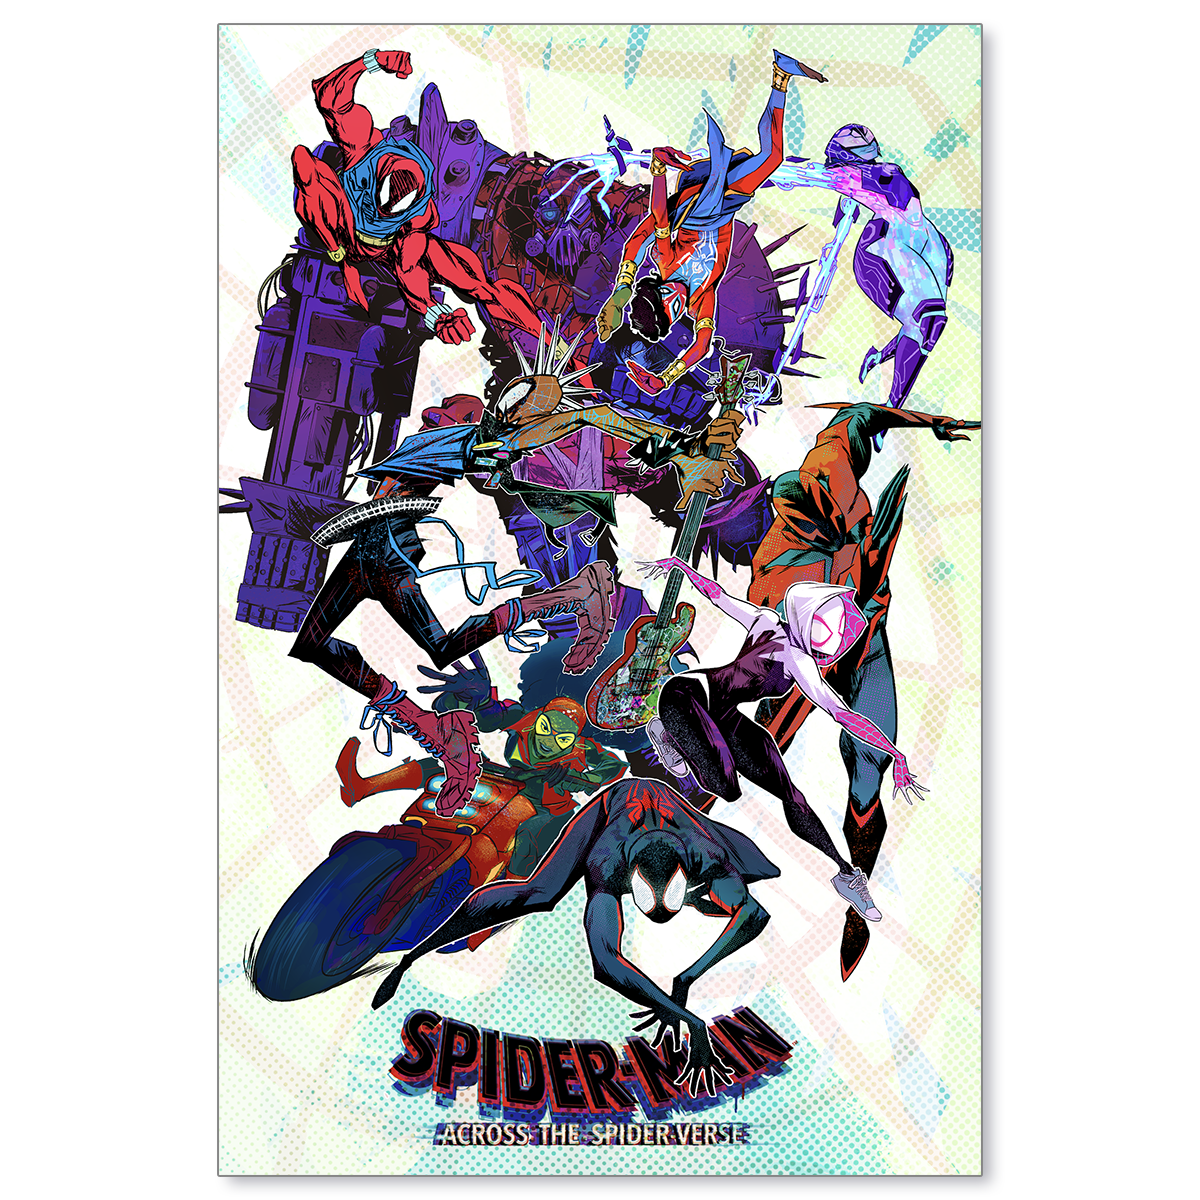 Spider-Man Across The Spider-verse by Sanford Greene (Signed)